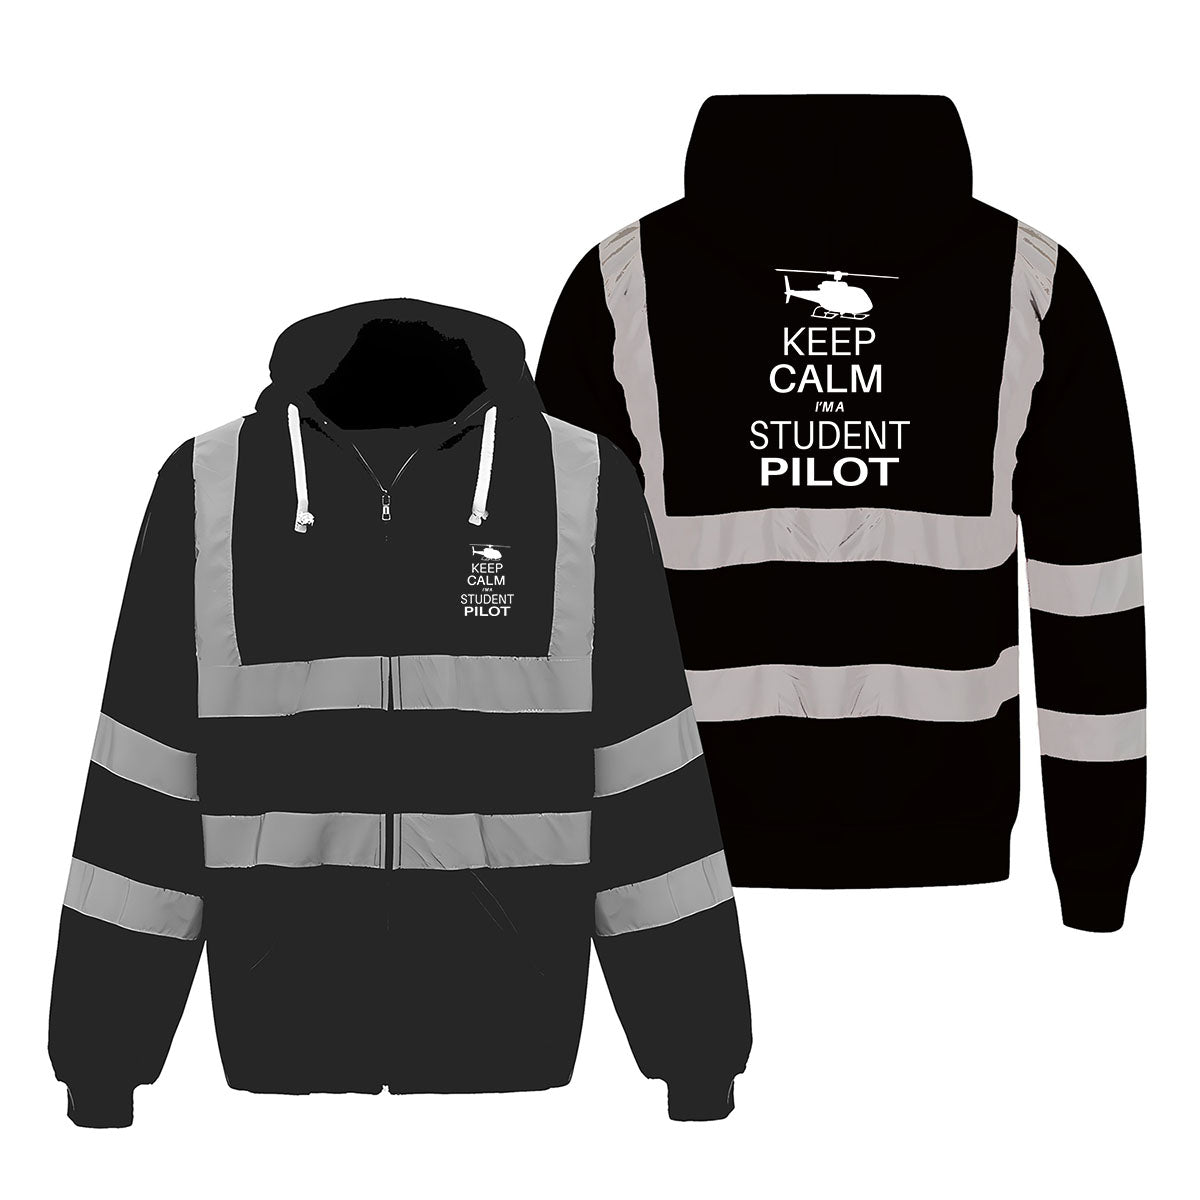 Student Pilot (Helicopter) Designed Reflective Zipped Hoodies